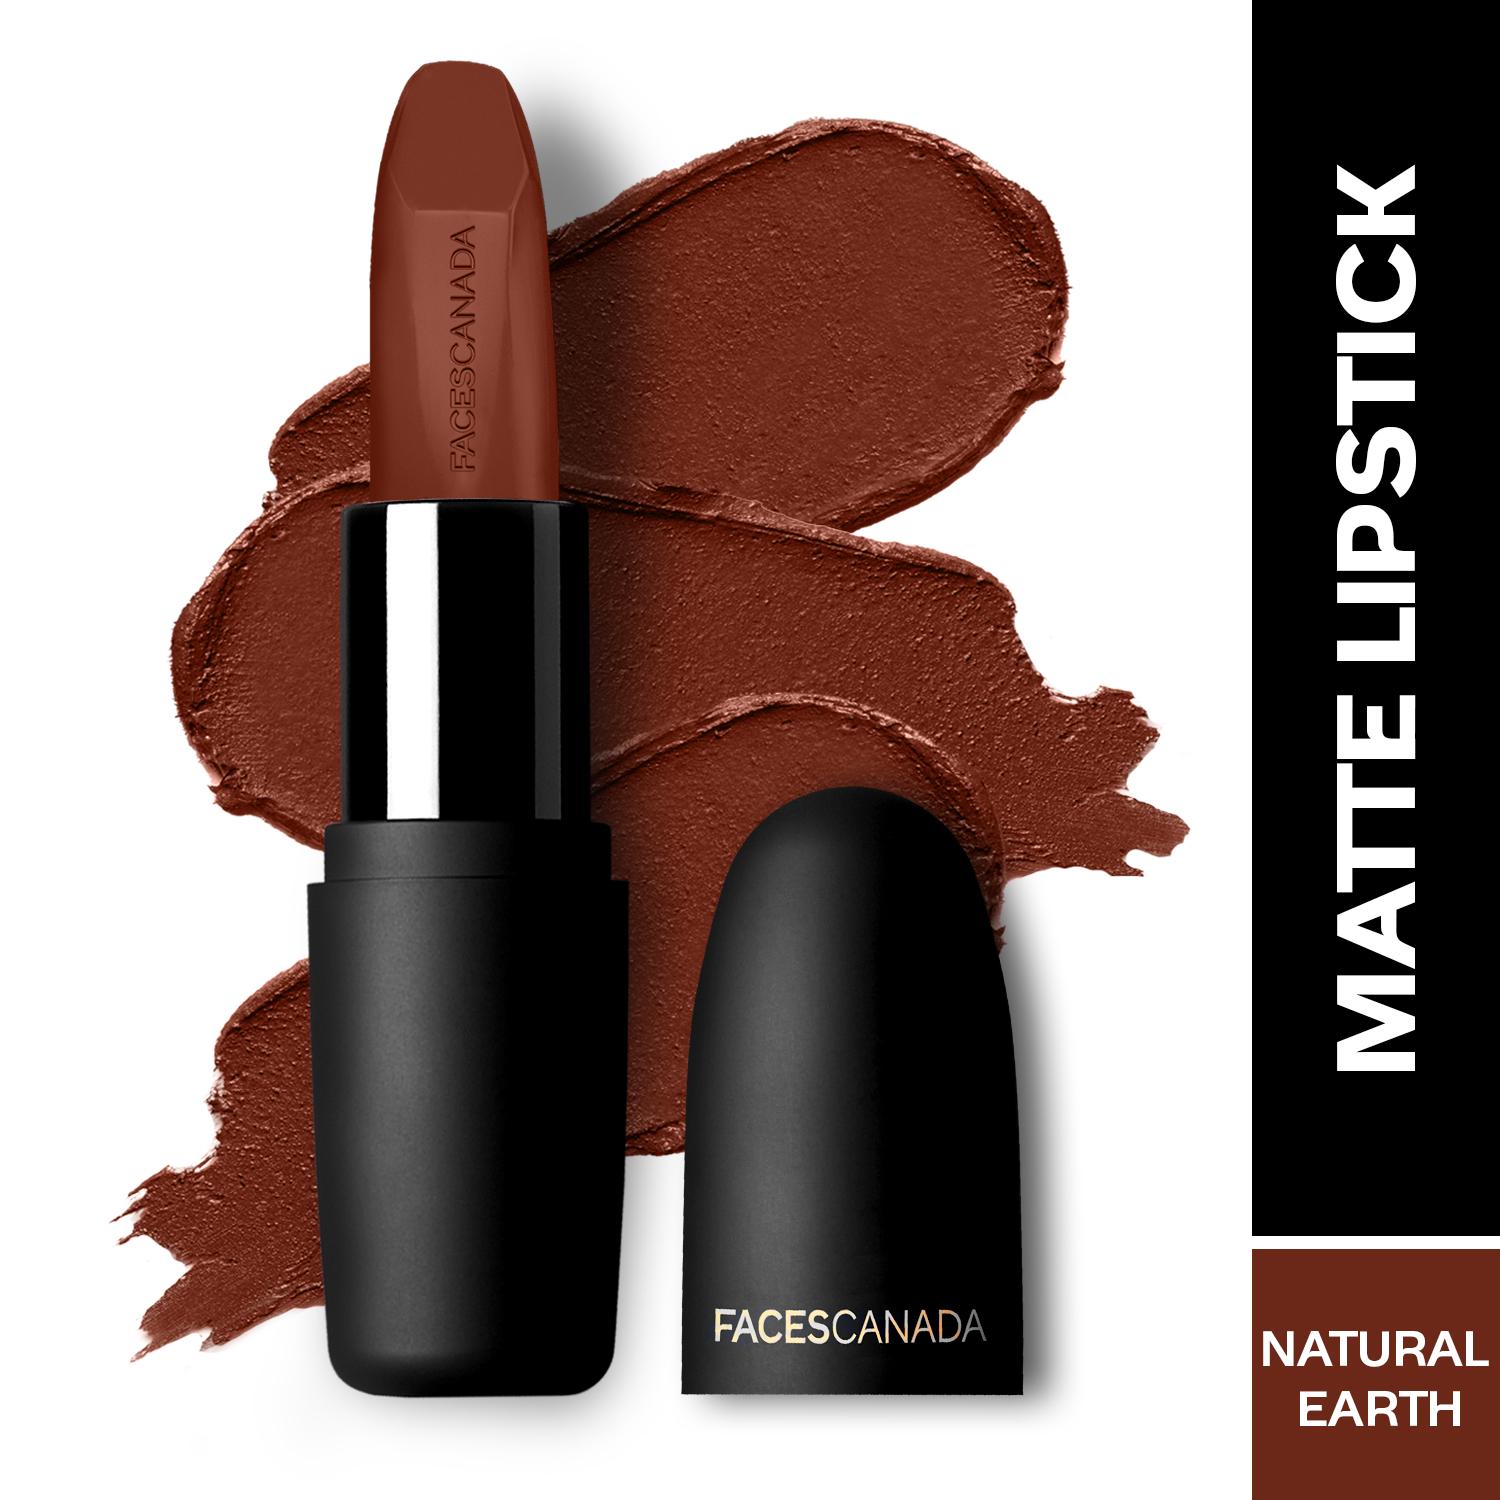 Faces Canada | Faces Canada Weightless Matte Lipstick, Pigmented and Hydrated Lips - Natural Earth 15 (4.5 g)